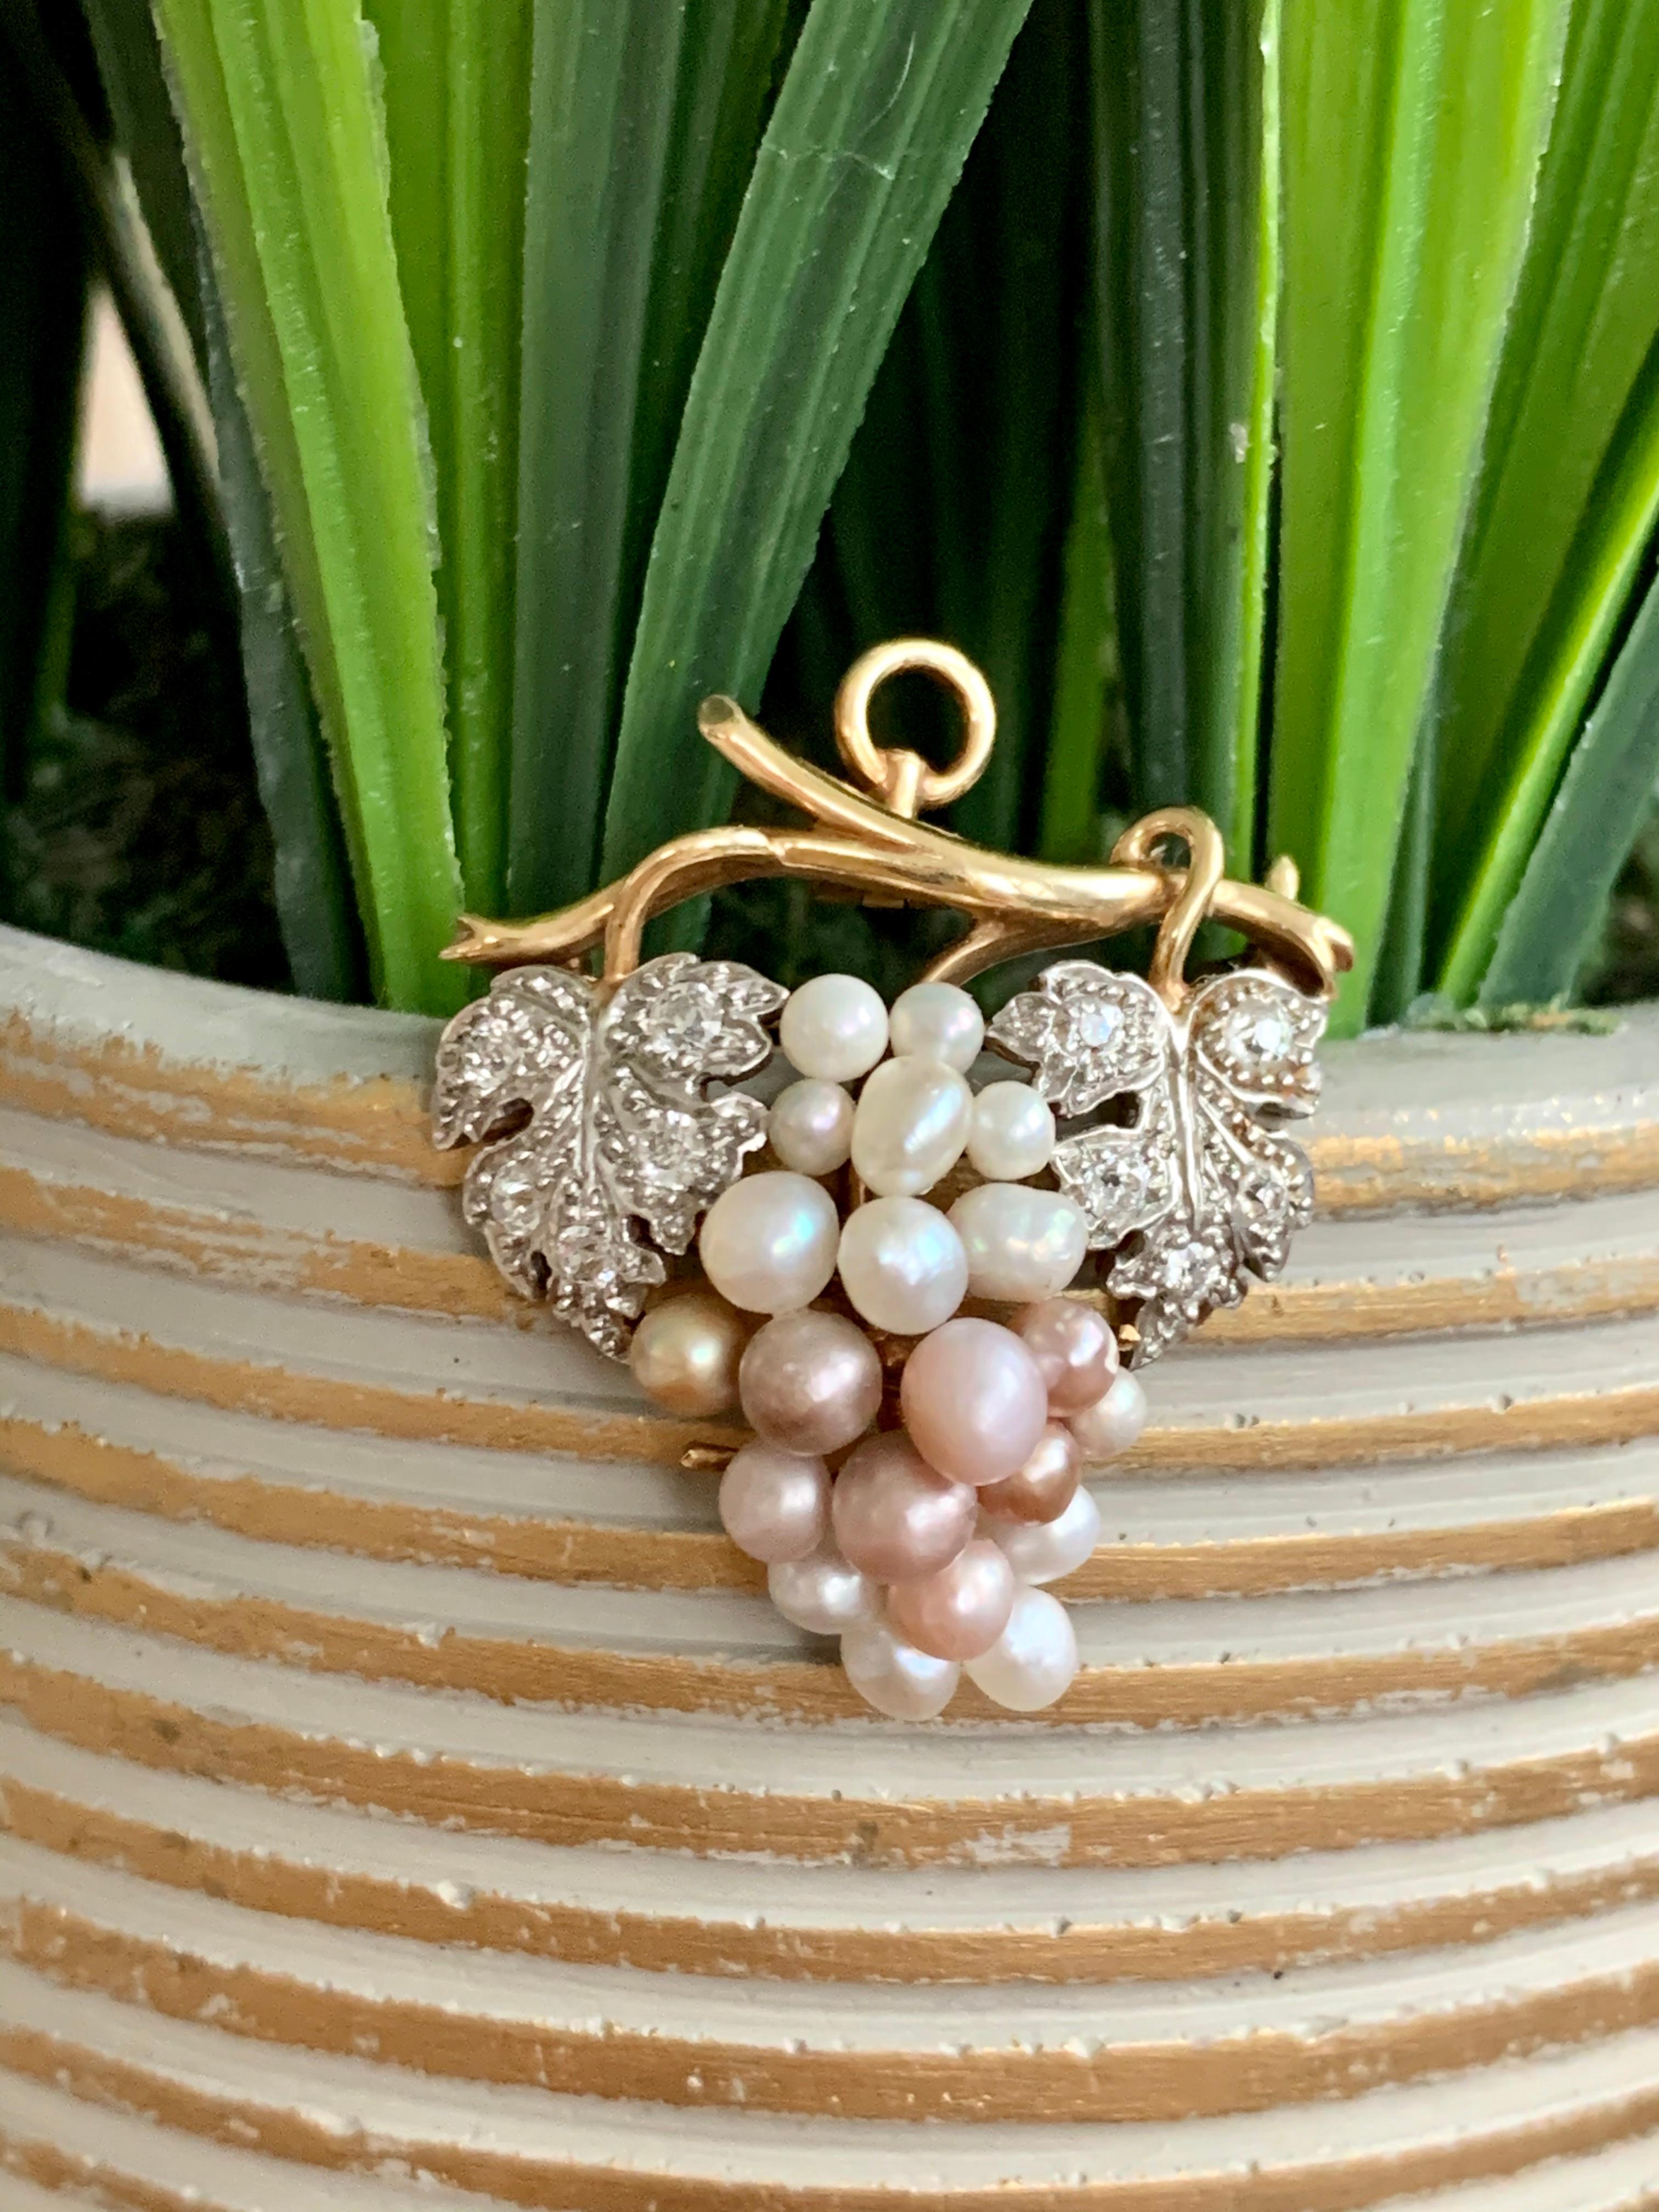 This lovely vintage brooch can also be worn as a pendant.  It's designed to look like a cluster of grapes.  It features 21 Pearls and several Euro cut Diamonds. 

The setting is 4 karat Yellow Gold.

Weight: 7 grams
The chain is shown, is for